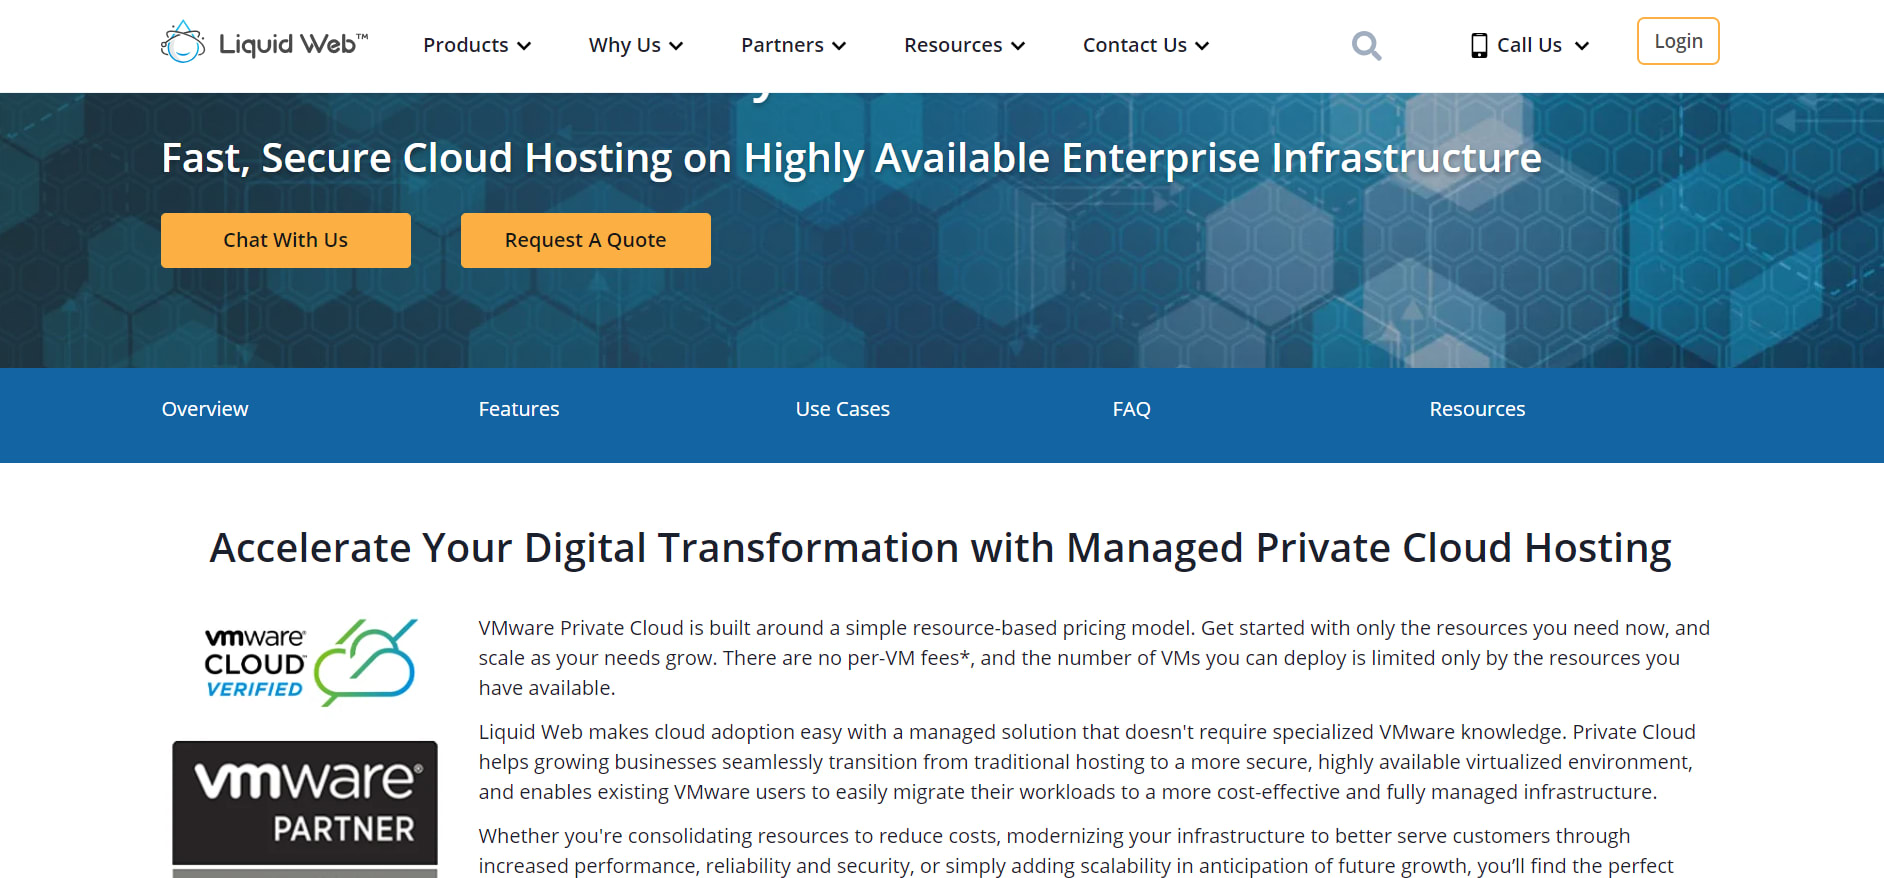 Managed private cloud hosting allows you to outsource server management tasks to a service provider.